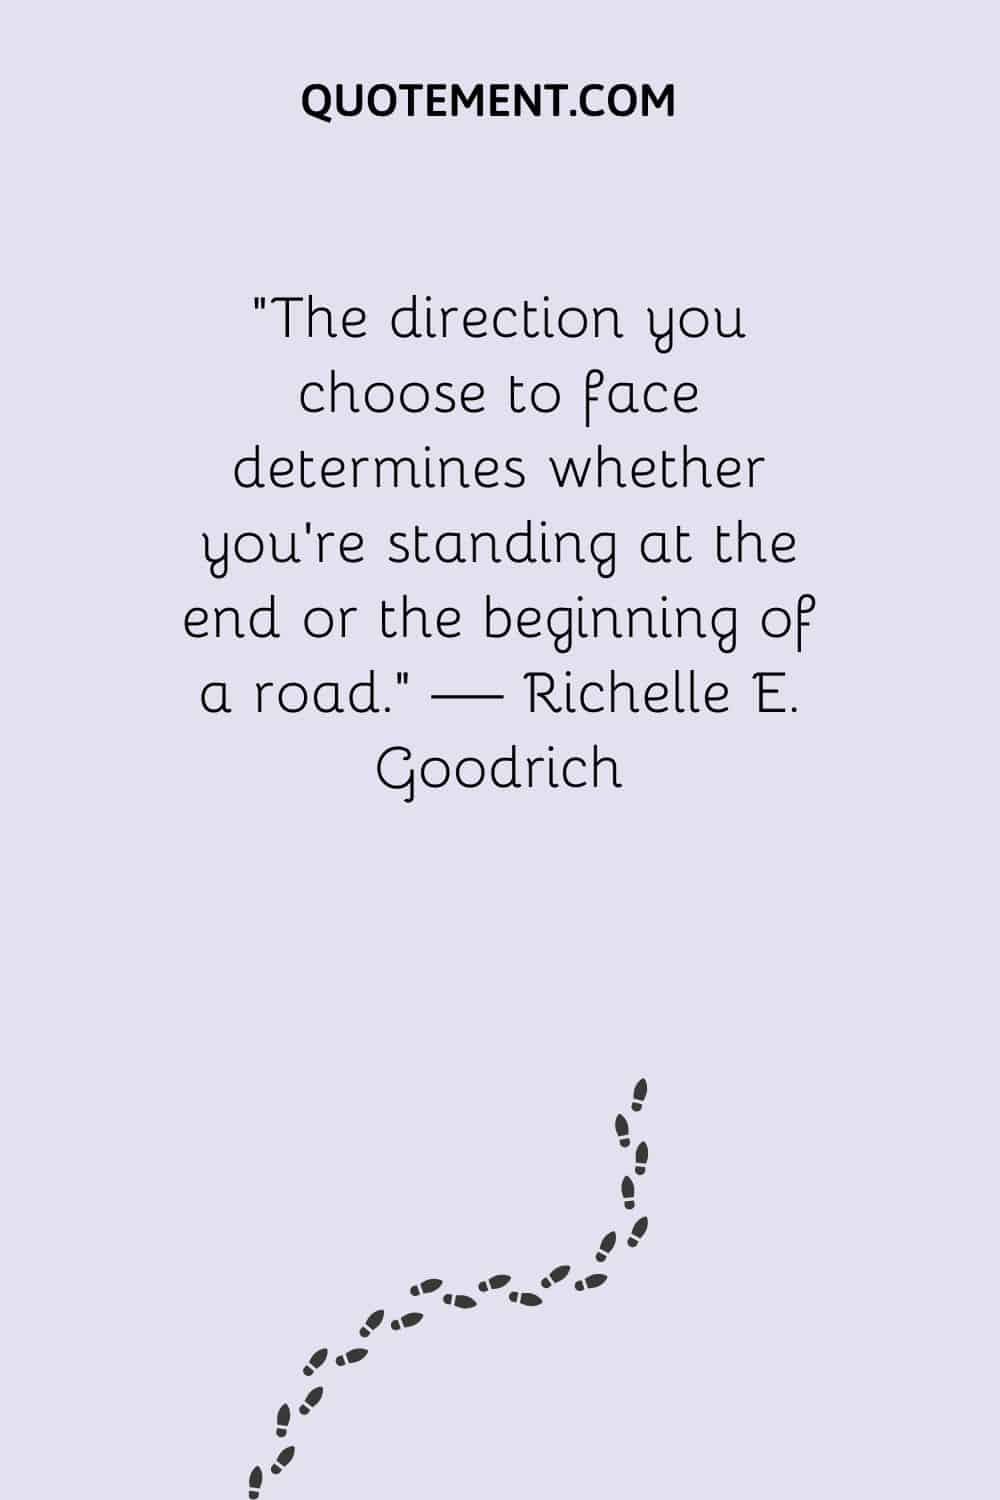 The direction you choose to face determines whether you’re standing at the end or the beginning of a road